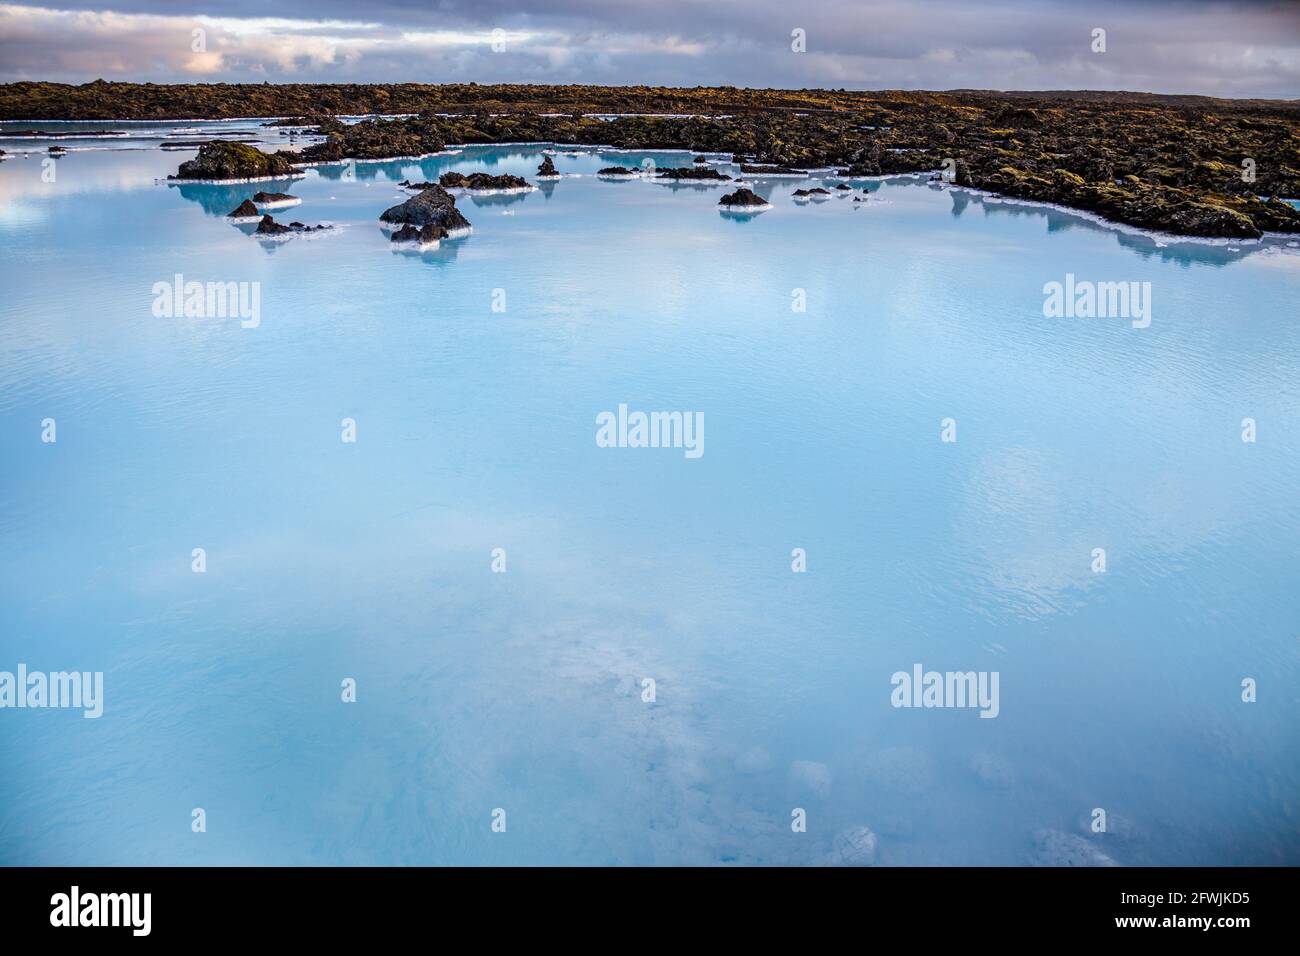 The rich geothermally warmed sea waters and volcanic lava terrain surrounding the Blue Lagoon Resort and Spa at dawn in Iceland Stock Photo